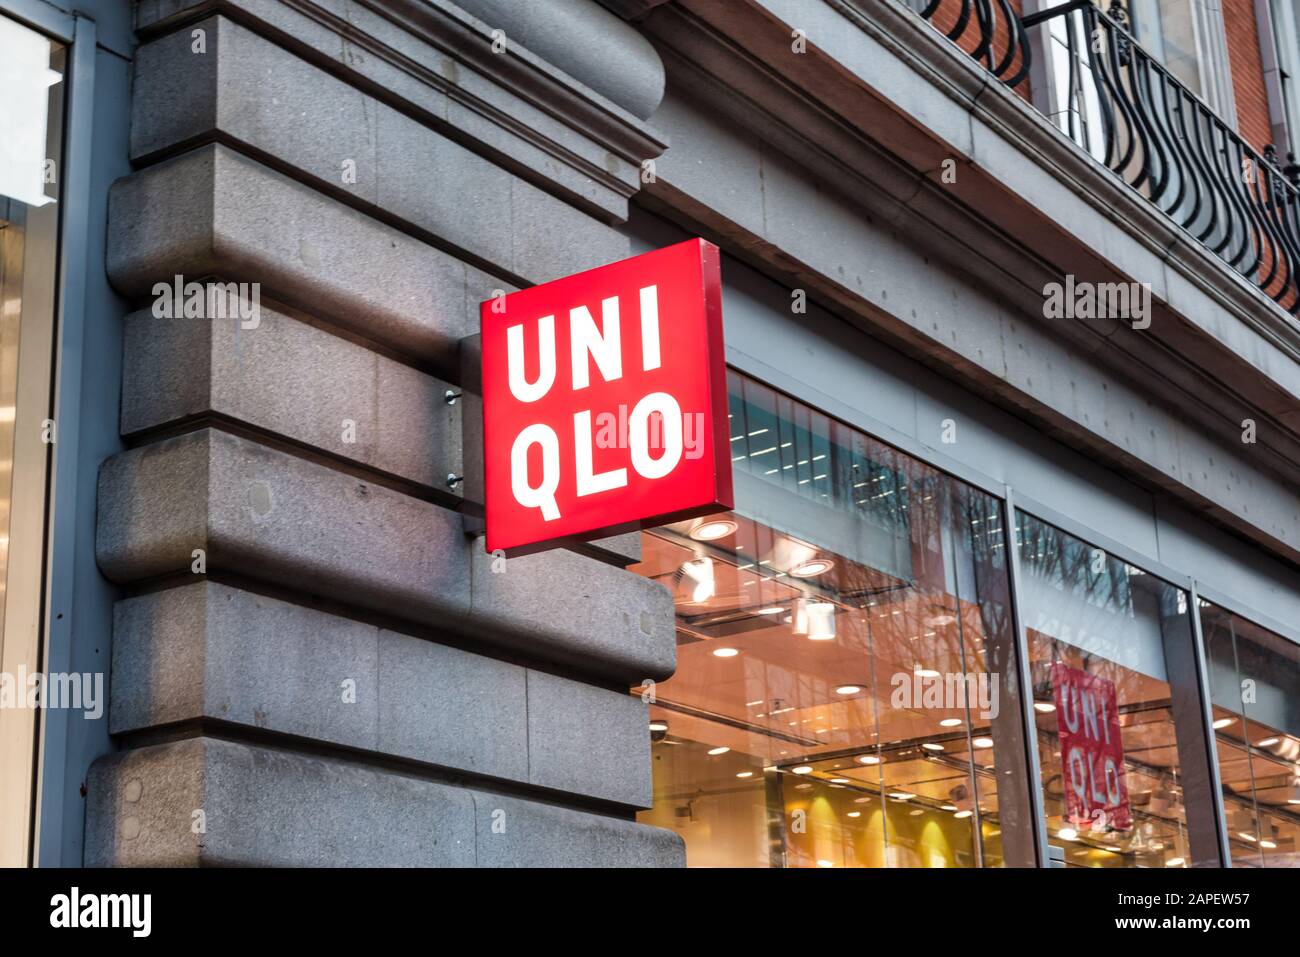 London, UK - Jan 16, 2020: The front of the UNIQLO clothing store on Oford  Street in London Stock Photo - Alamy